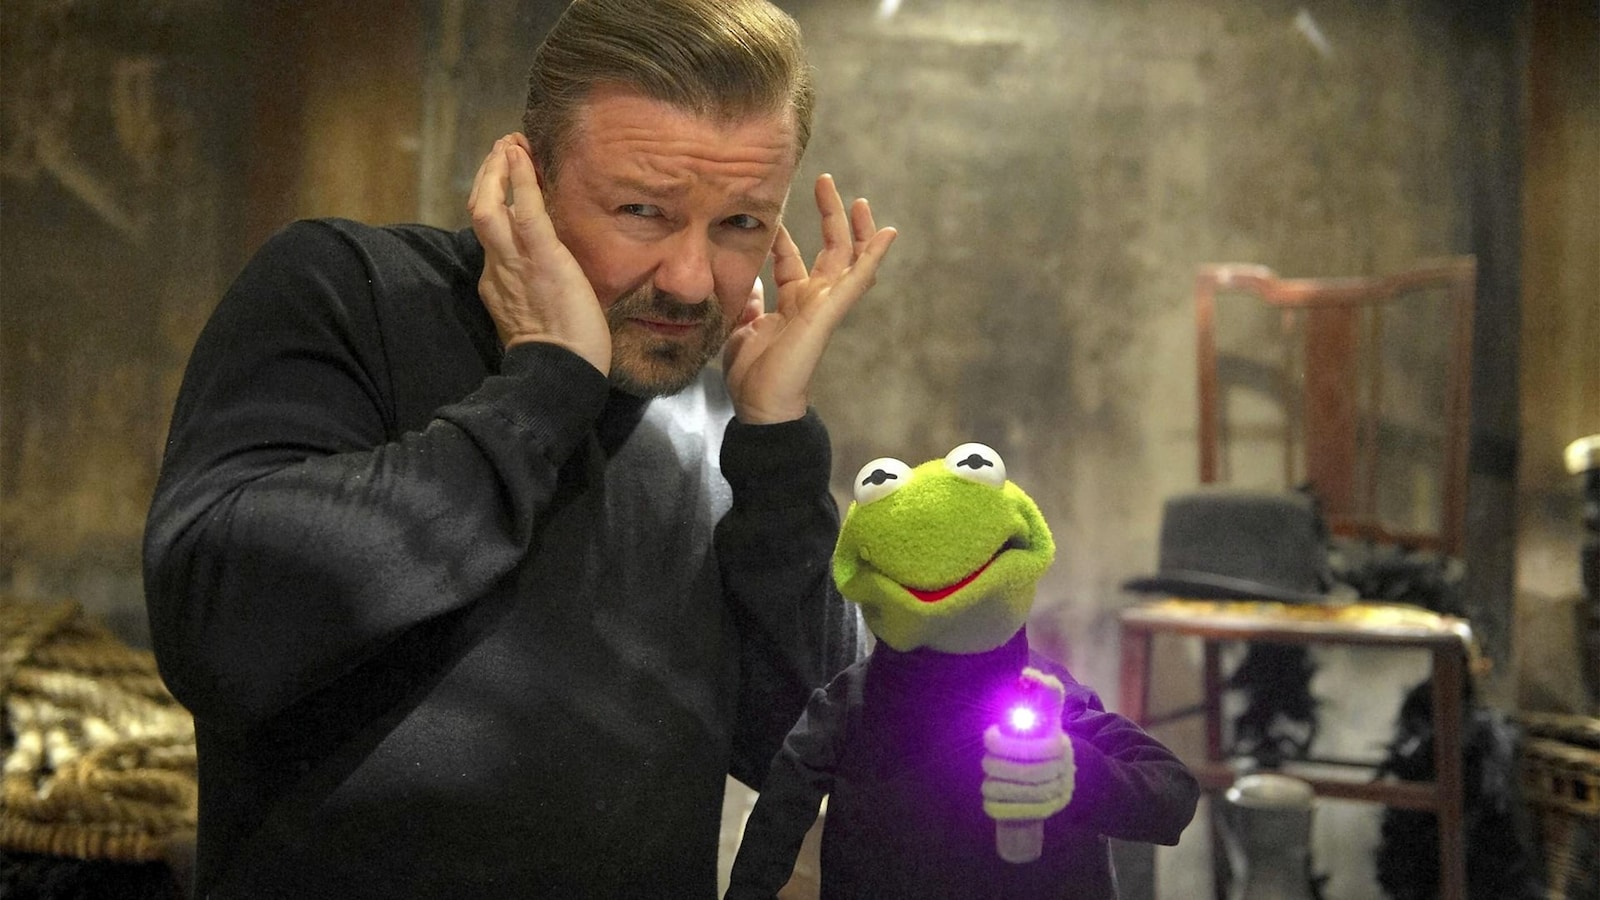 muppets-most-wanted-2014